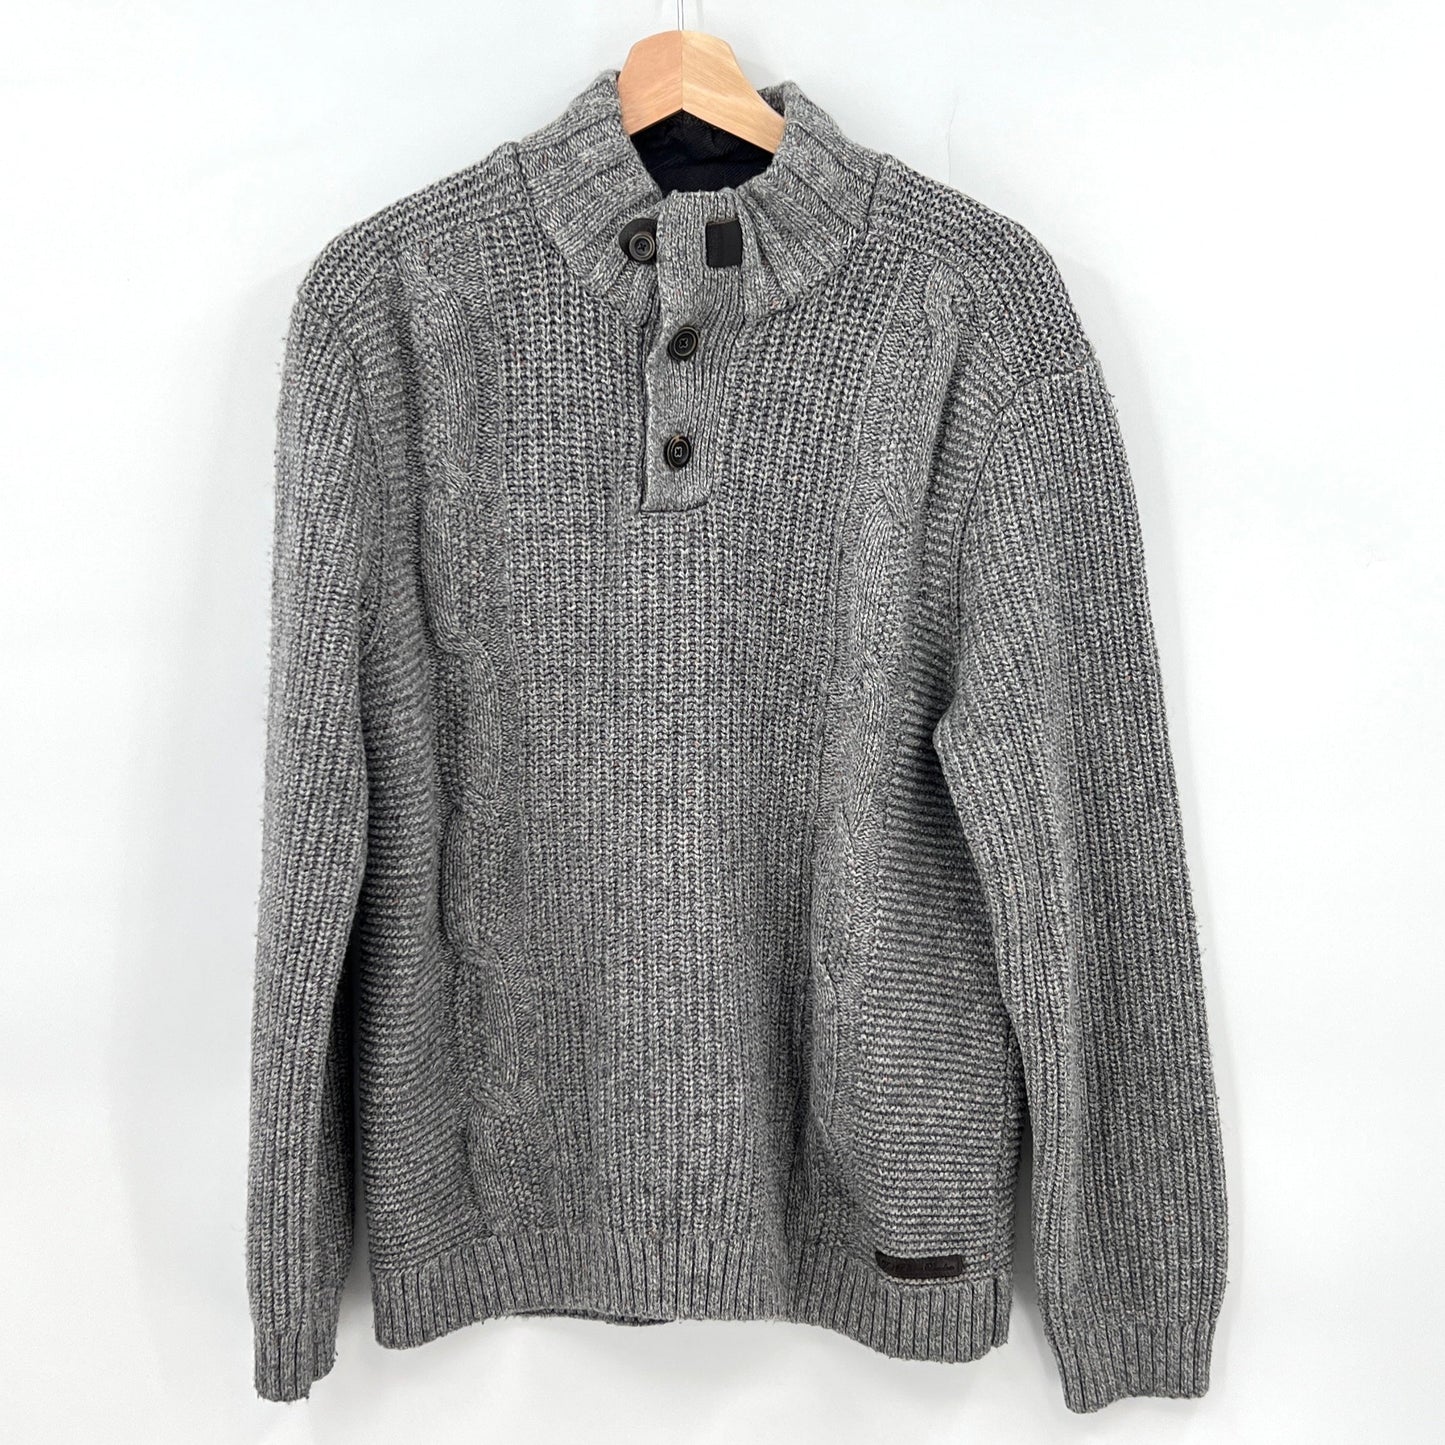 Ted Baker London Cotton Sweater L/XL